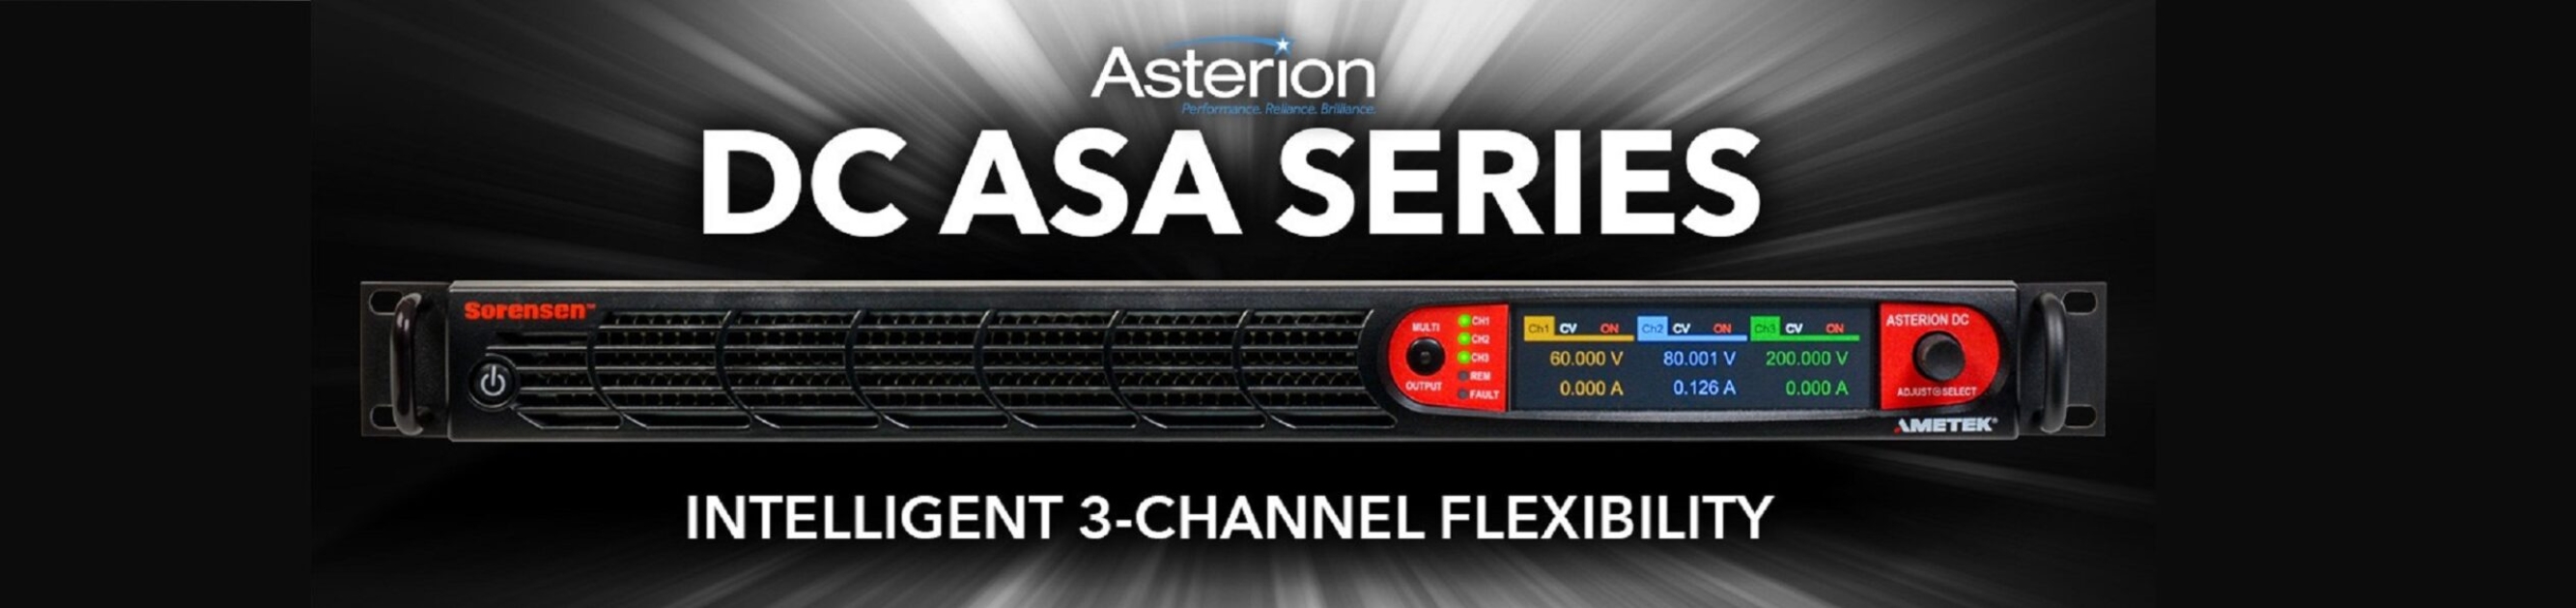 Asterion ASA Tripple DC Power Supply